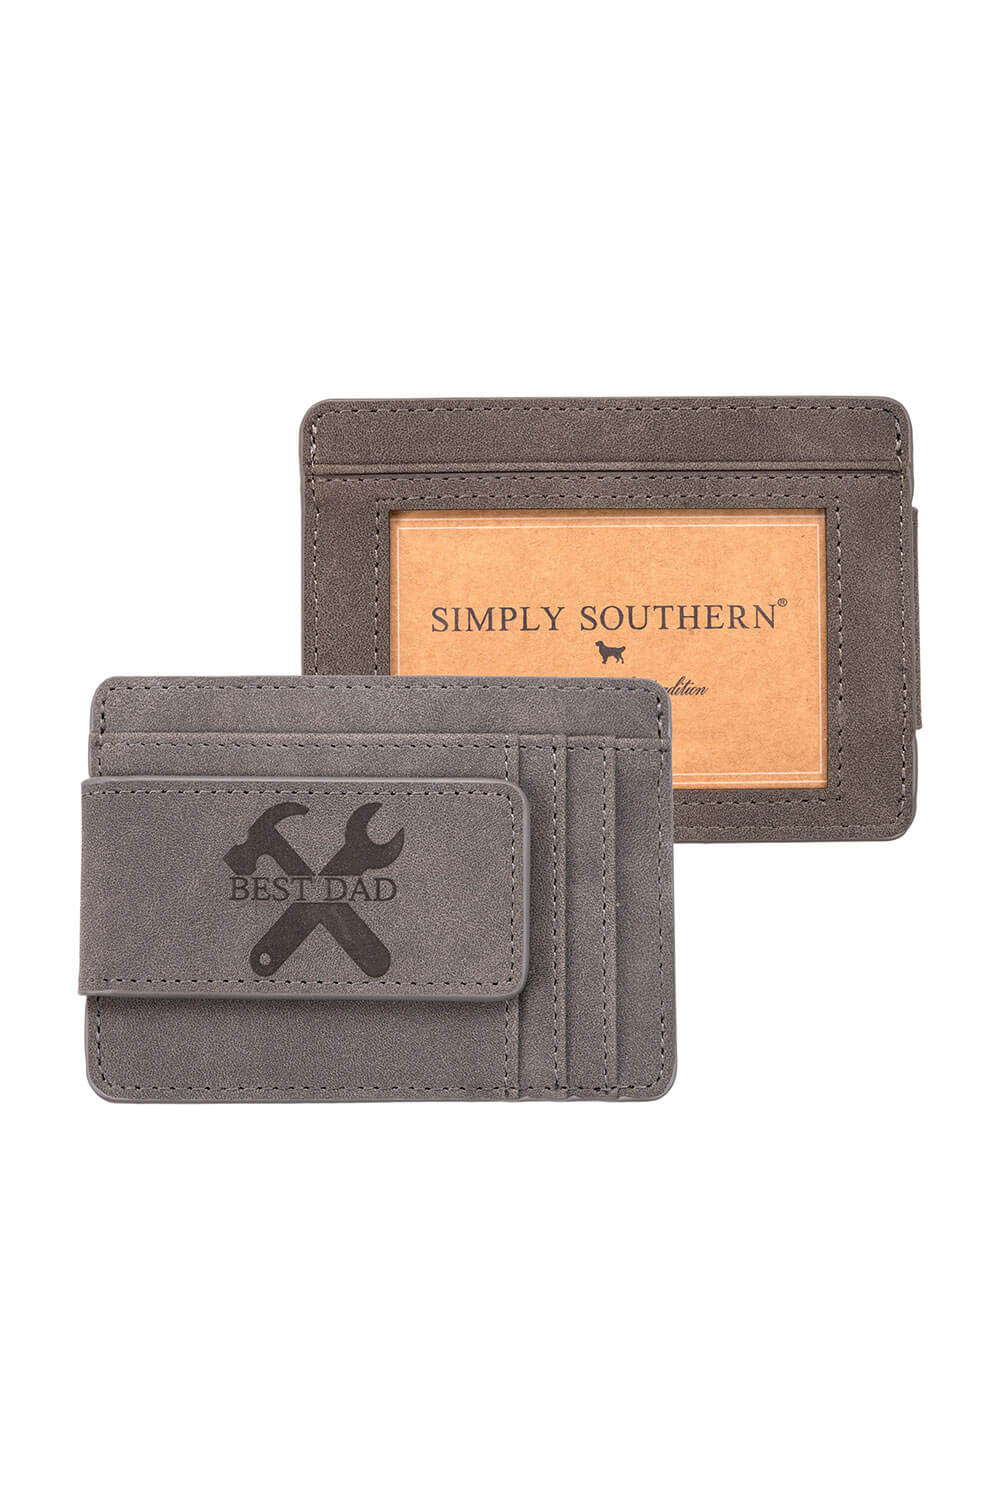 Simply Southern Best Dad Leather Money Clip Wallet